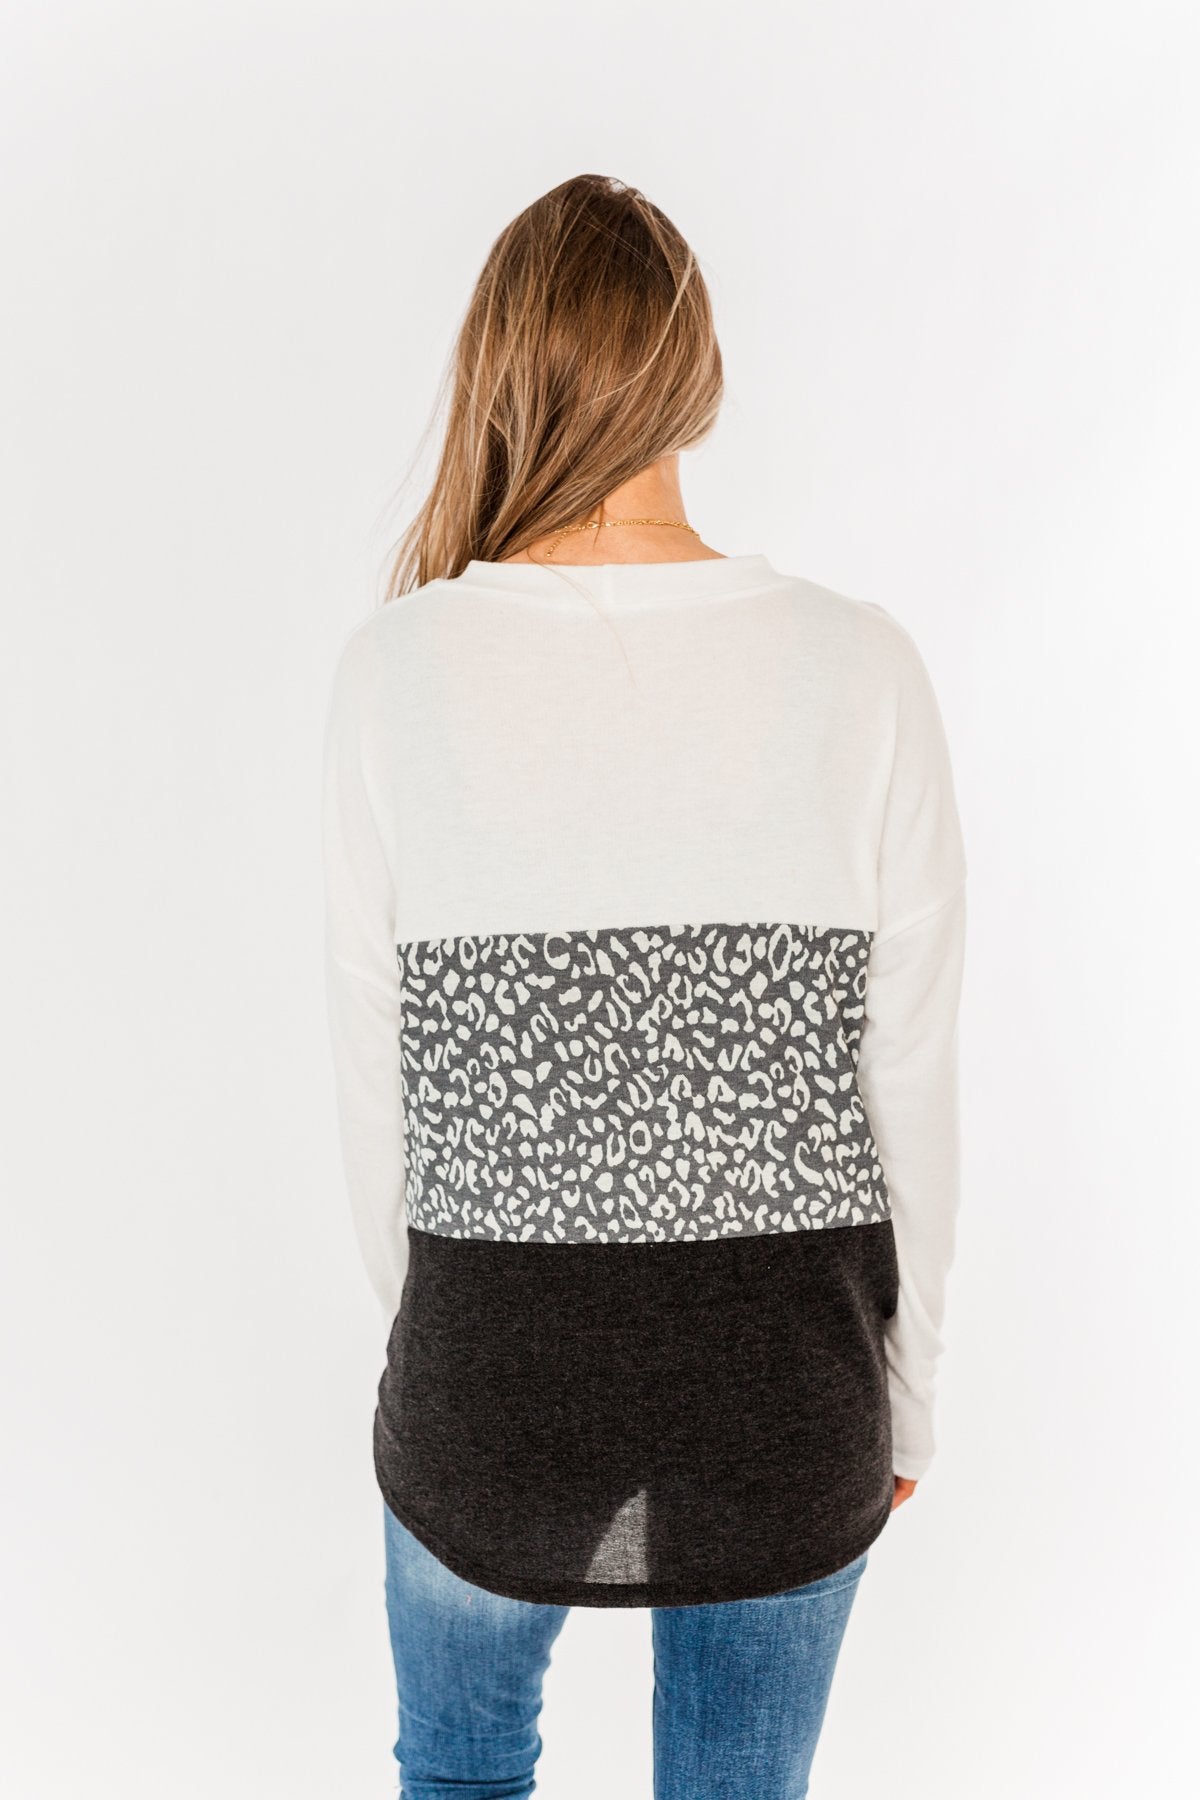 Reach For The Stars Color Block Top- Off-White, Charcoal & Black